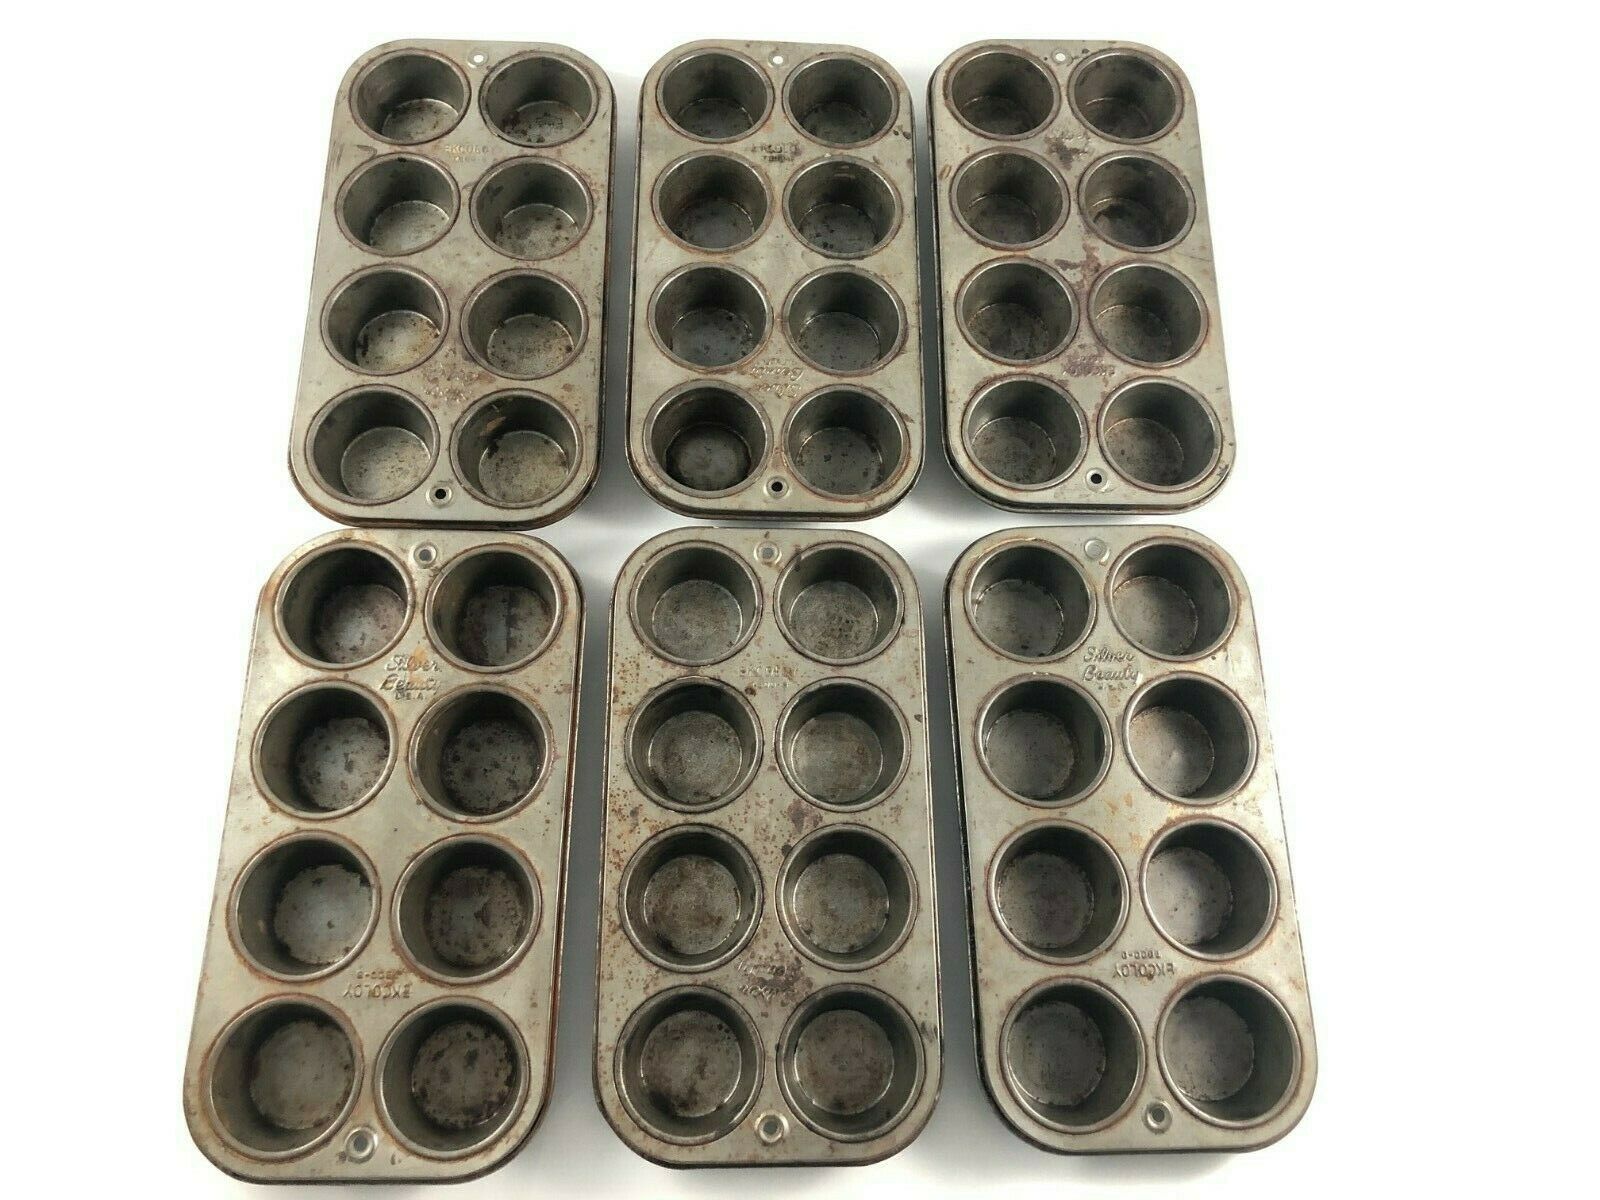 Lot Of 6 Vintage Ekcoloy Silver Beauty 8 Muffin Baking Cupcake Pans W/ 2" Cups